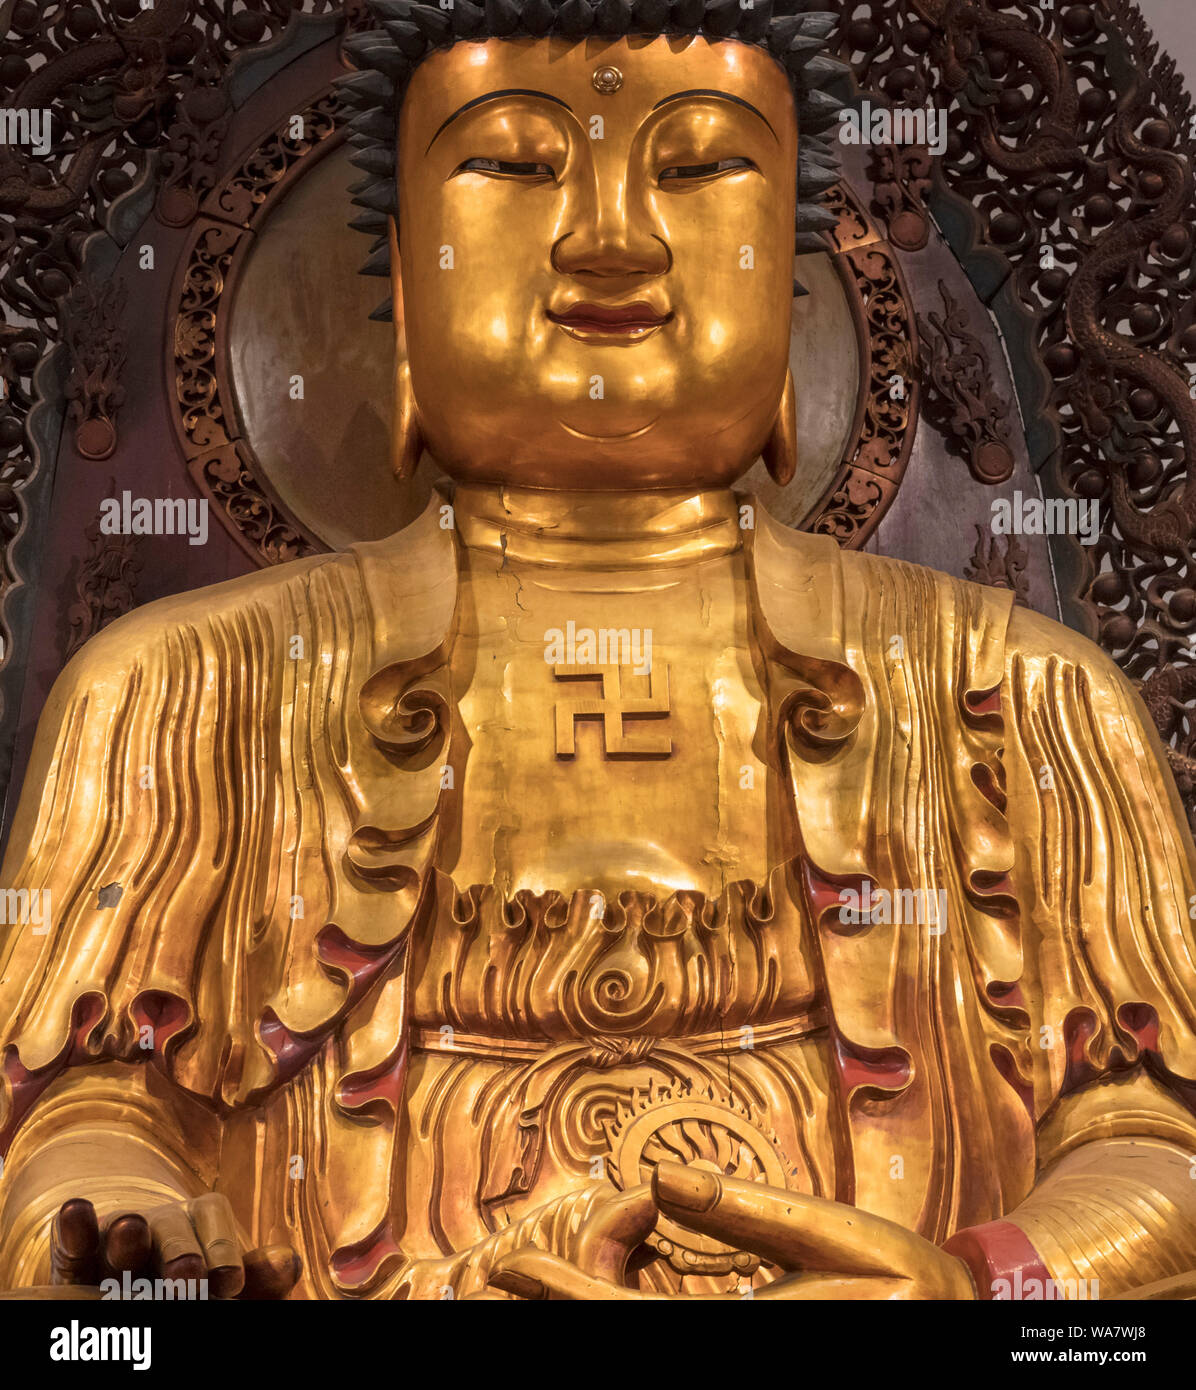 Swastika on the chest of a Buddha statue in the Grand Hall of the Jade Buddha Temple, Shanghai, China. In Buddhism, the swastika is considered to symbolize the auspicious footprints of the Buddha. Stock Photo